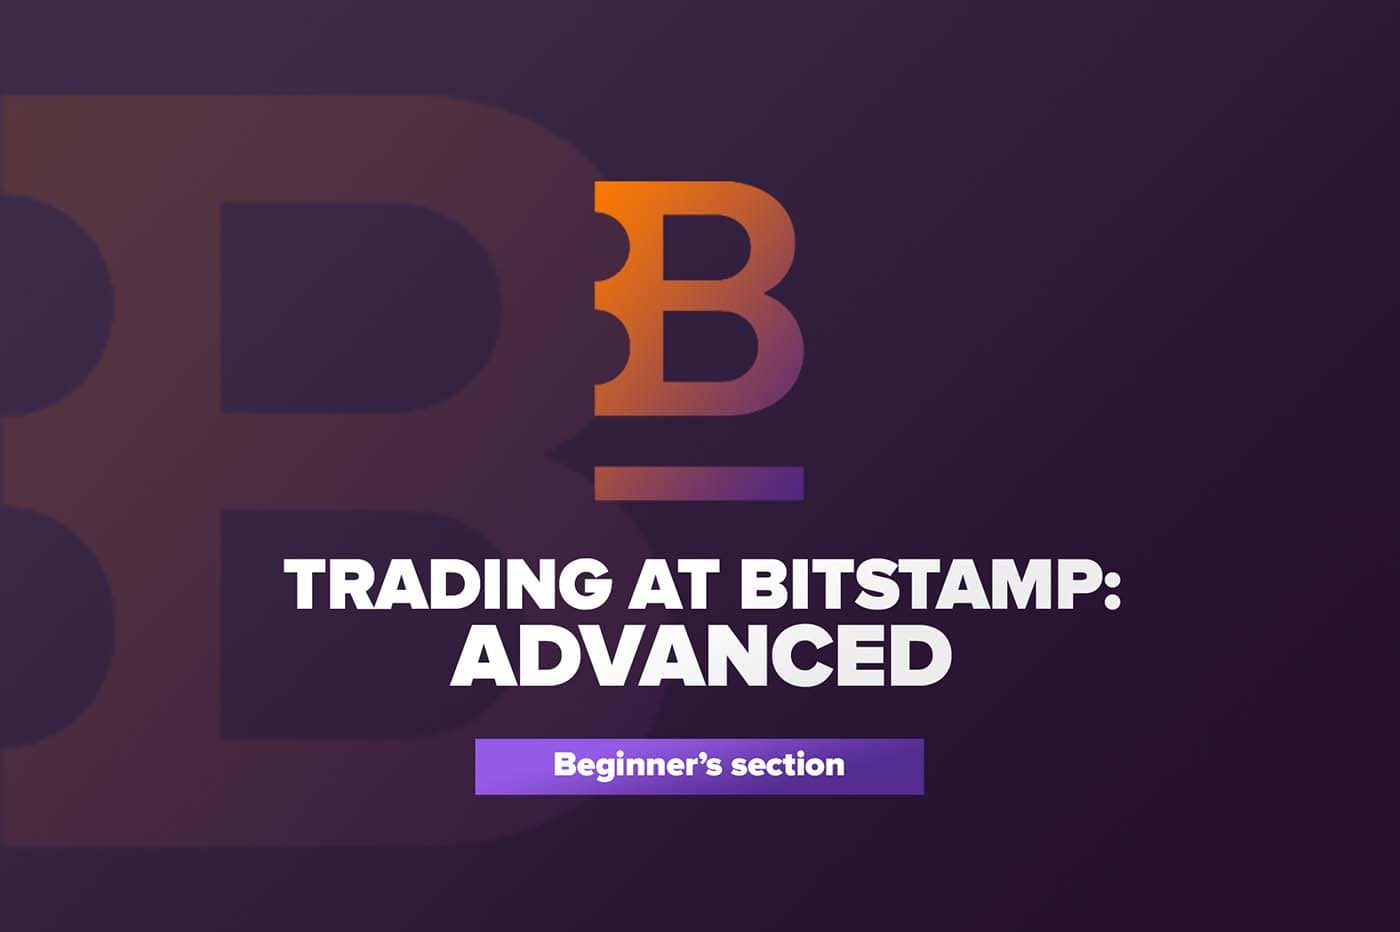 Article Trading at Bitstamp: Advanced